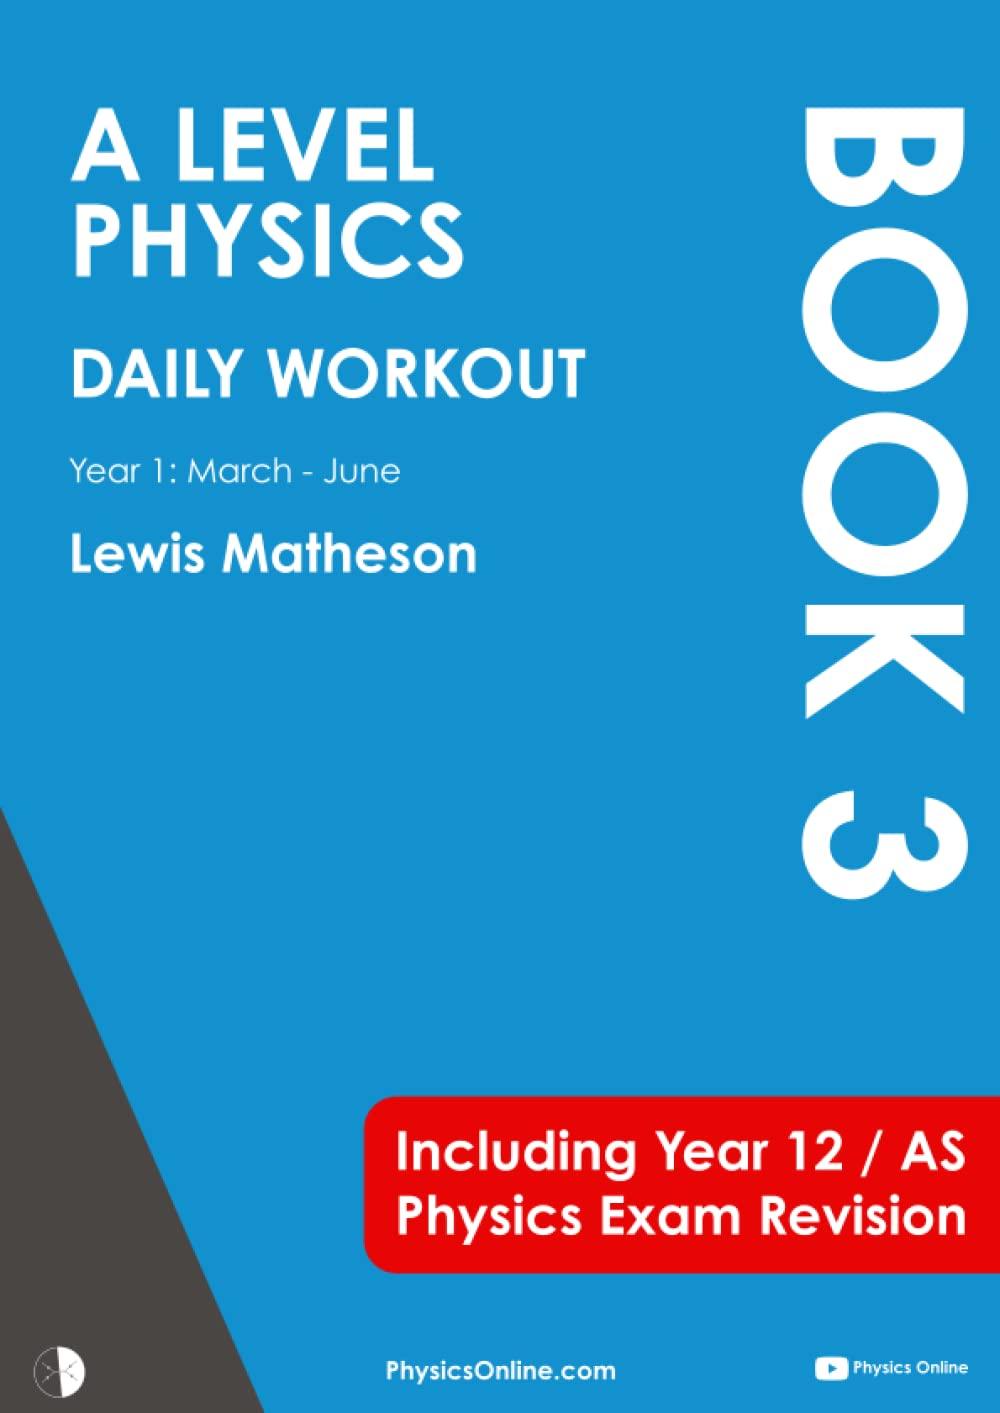 a level physics daily workout year 1 march to june book 3 1st edition physics online, lewis matheson